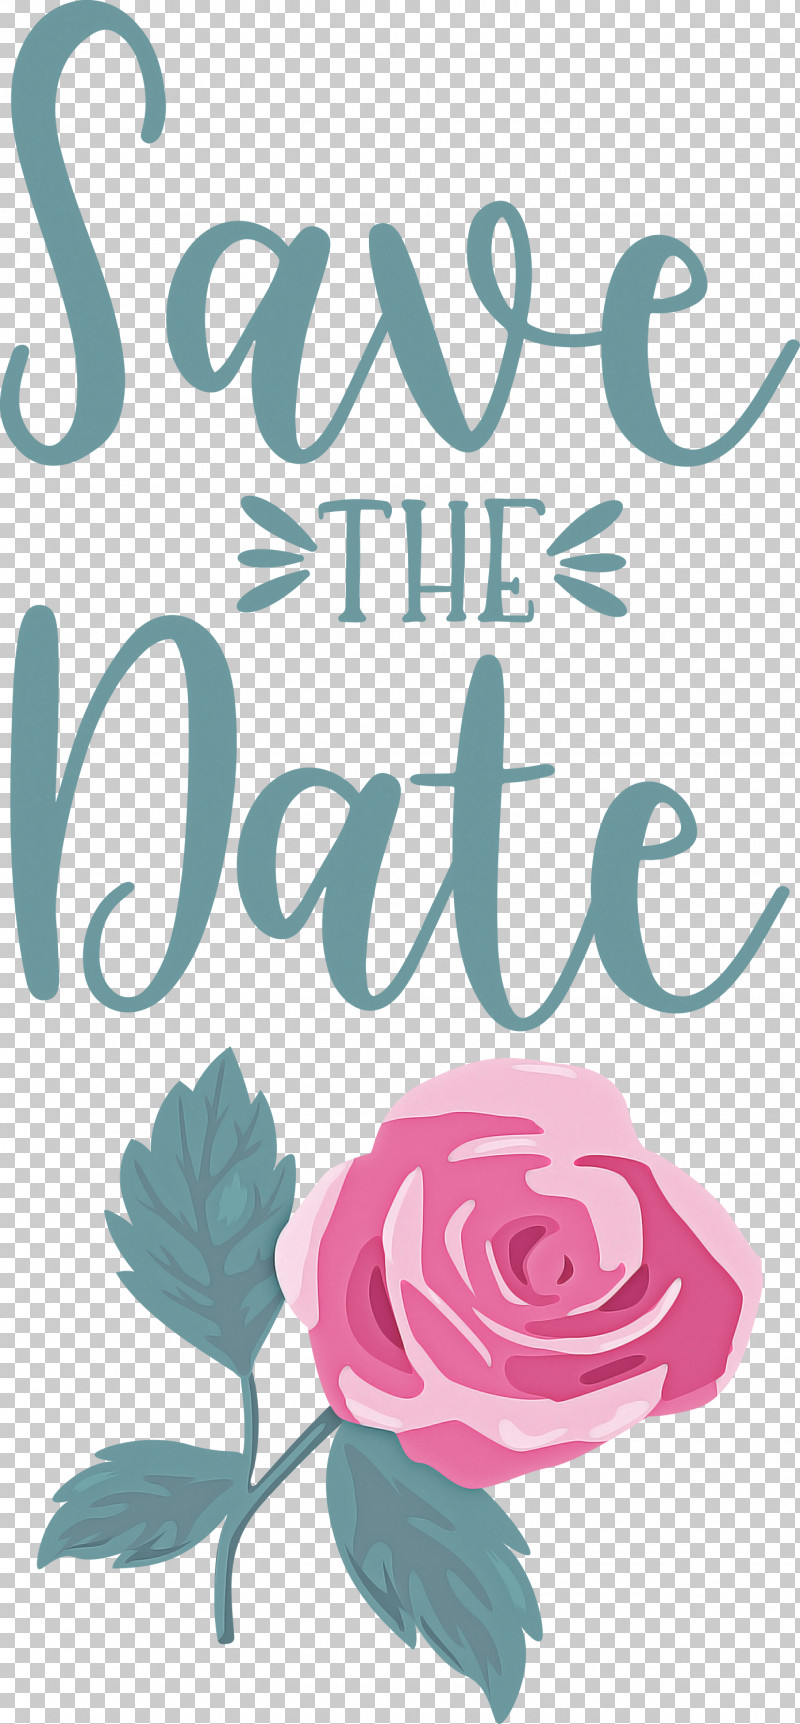 Save The Date Wedding PNG, Clipart, Floral Design, Meter, Petal, Rose, Rose Family Free PNG Download